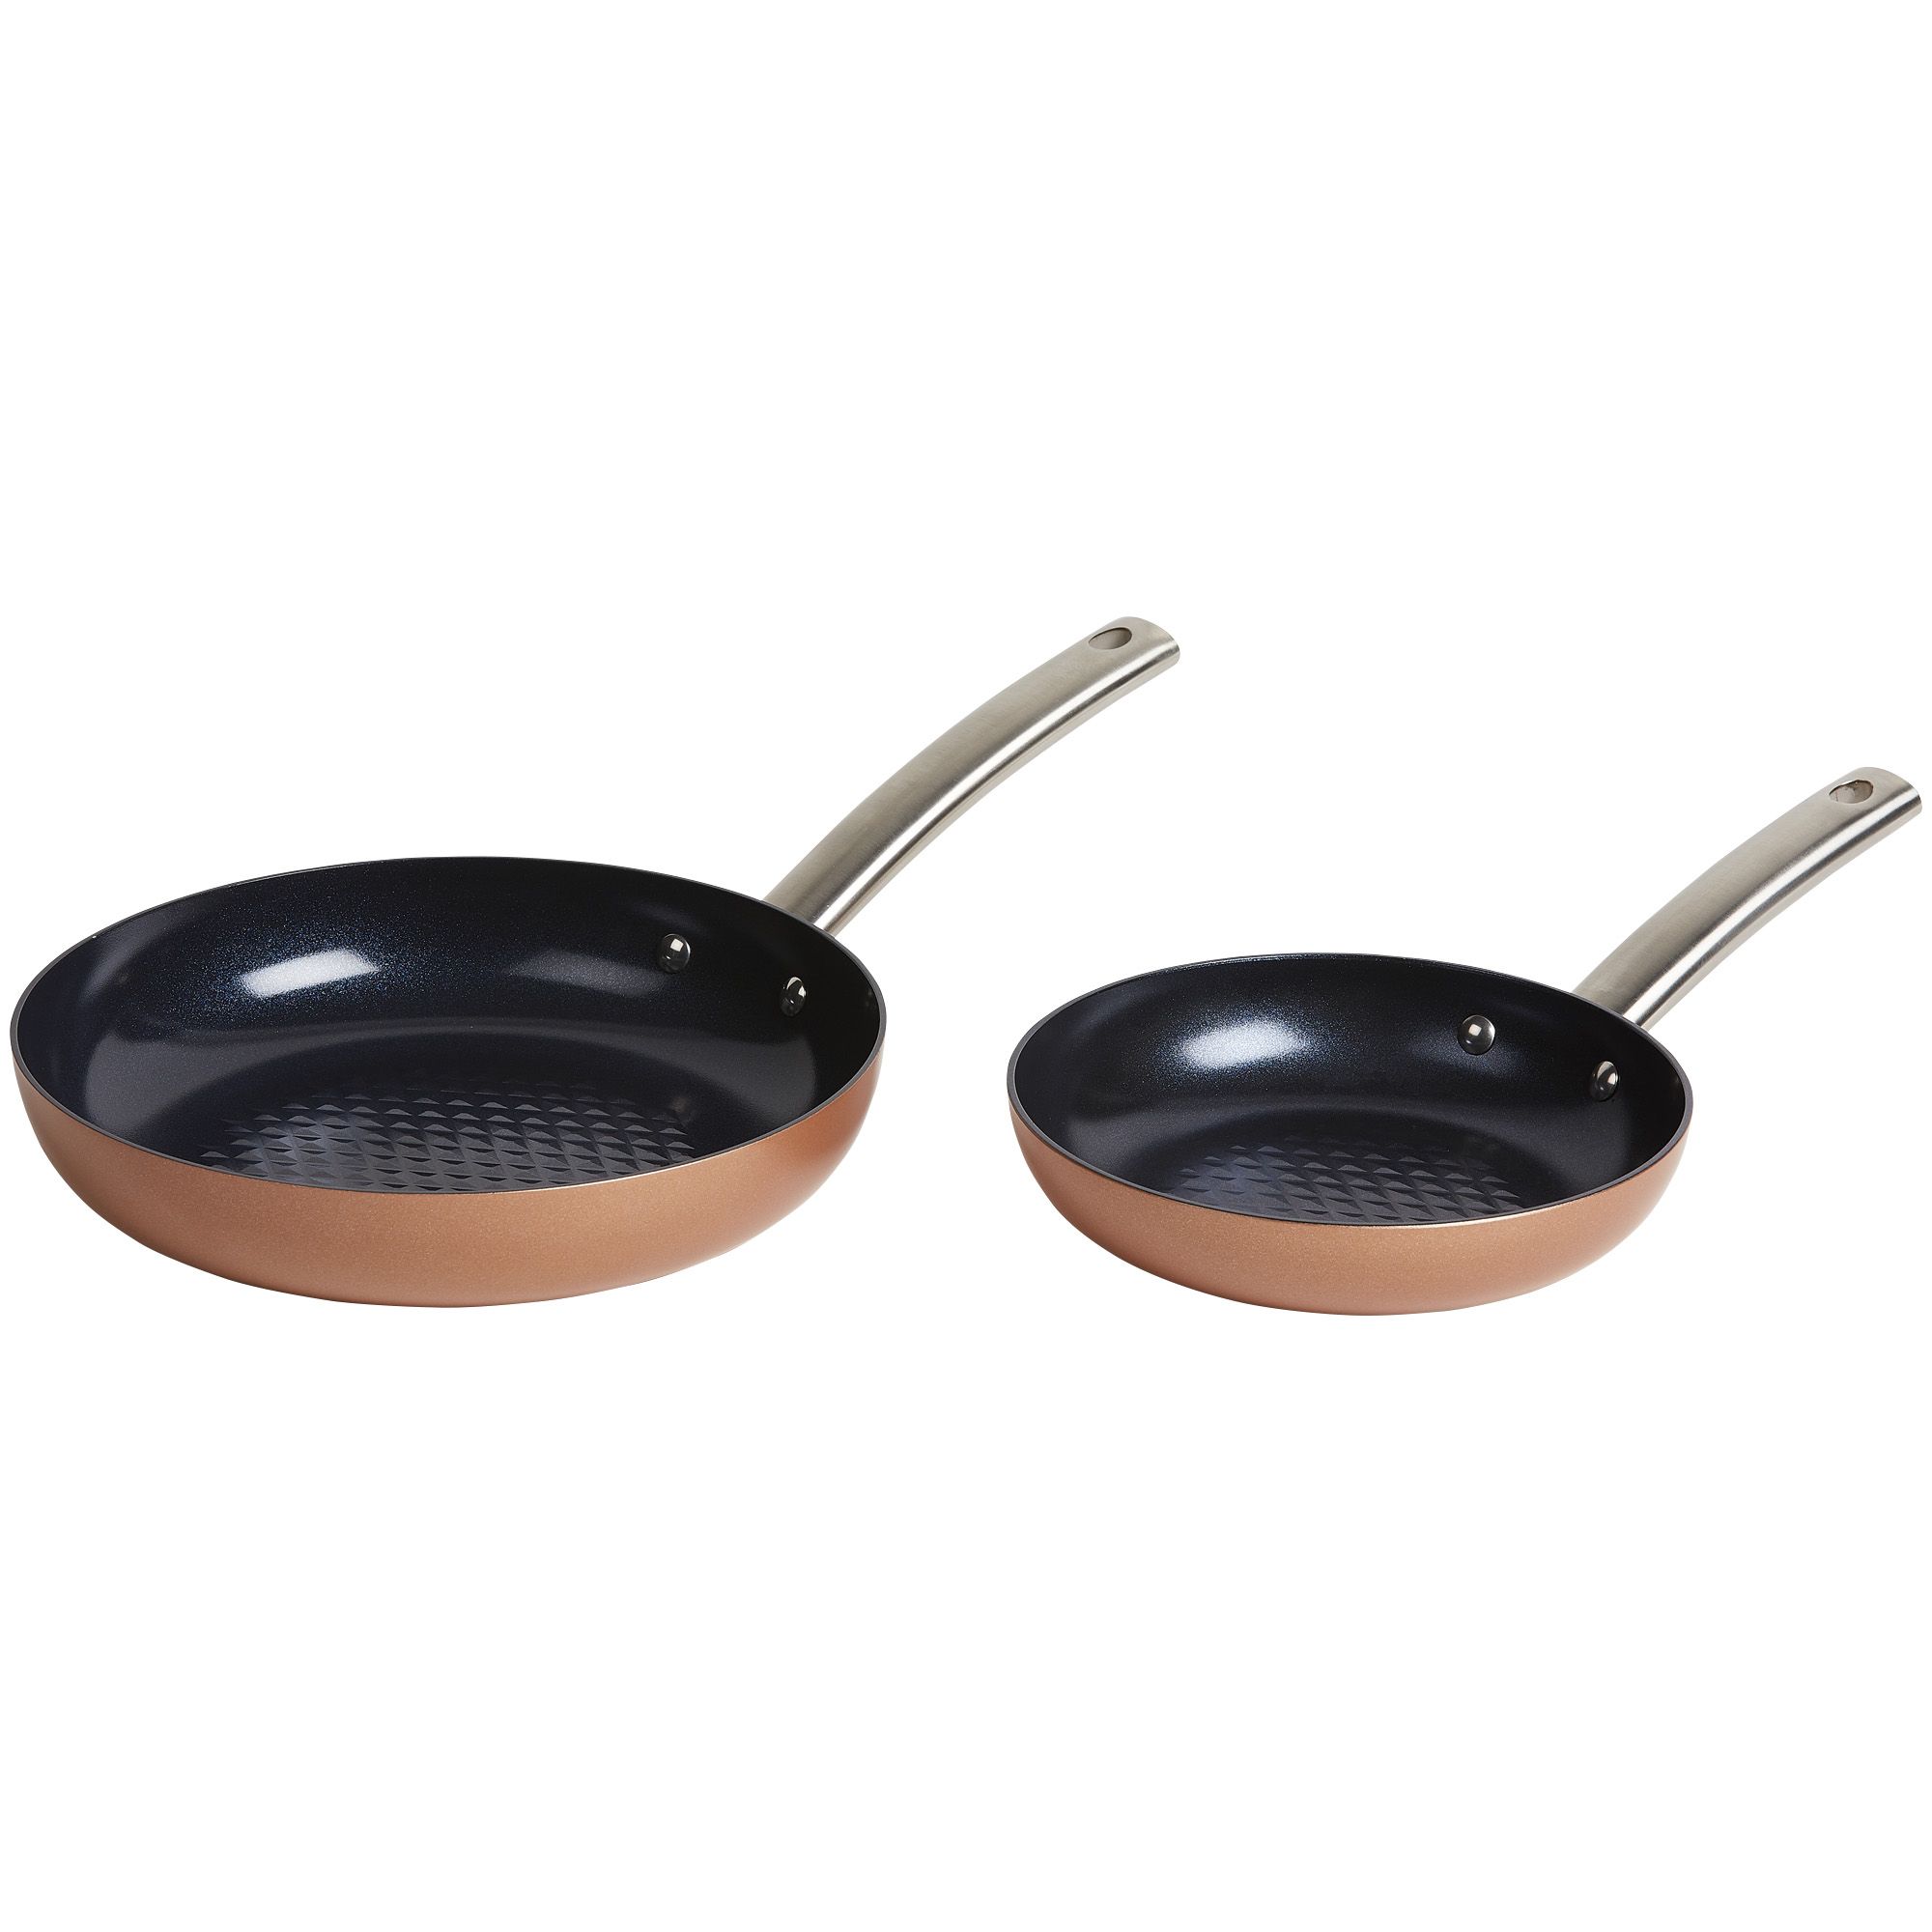 Copper Chef Black Diamond 12 In. Round Fry Pan with Glass Lid